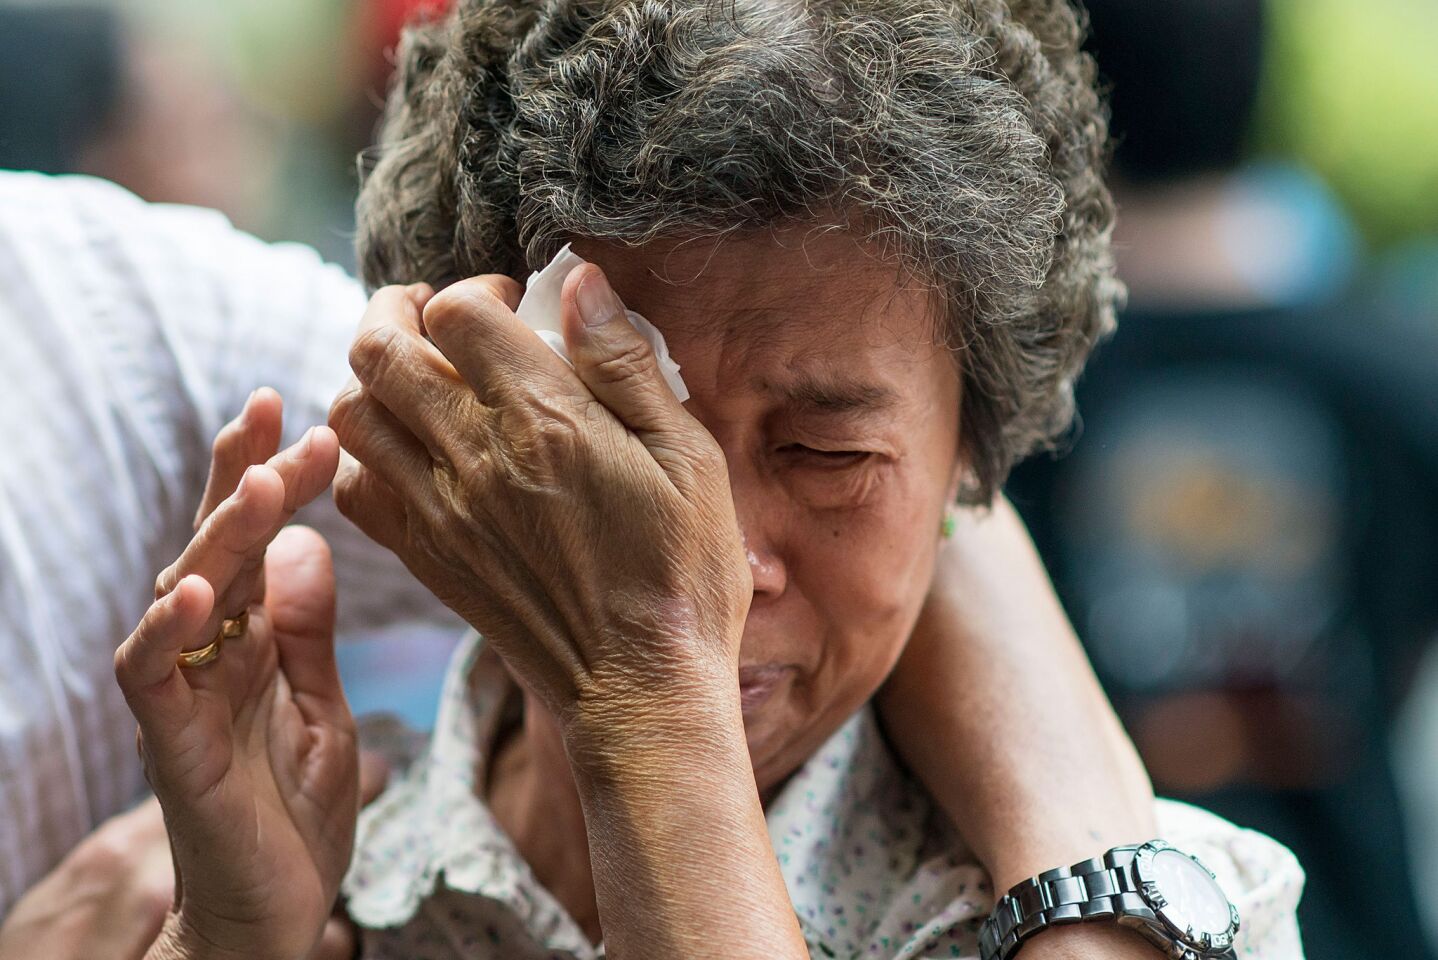 The mother of a Flight MH370 passenger reacts at a memorial service in Kuala Lumpur, Malaysia.